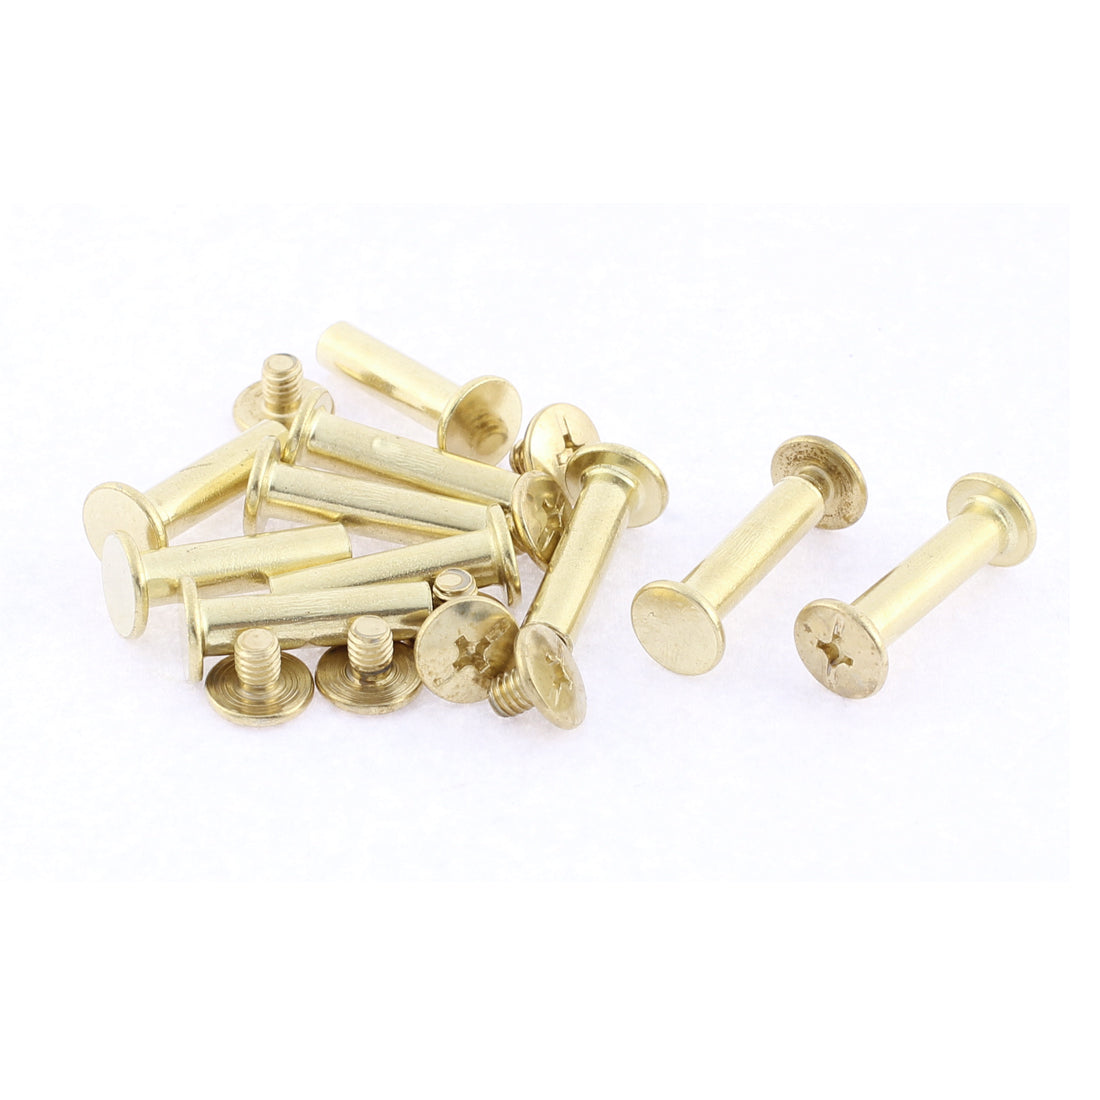 uxcell Uxcell 10pcs 5mmx20mm Brass Plated Binding Chicago Screw Post for Album Scrapbook